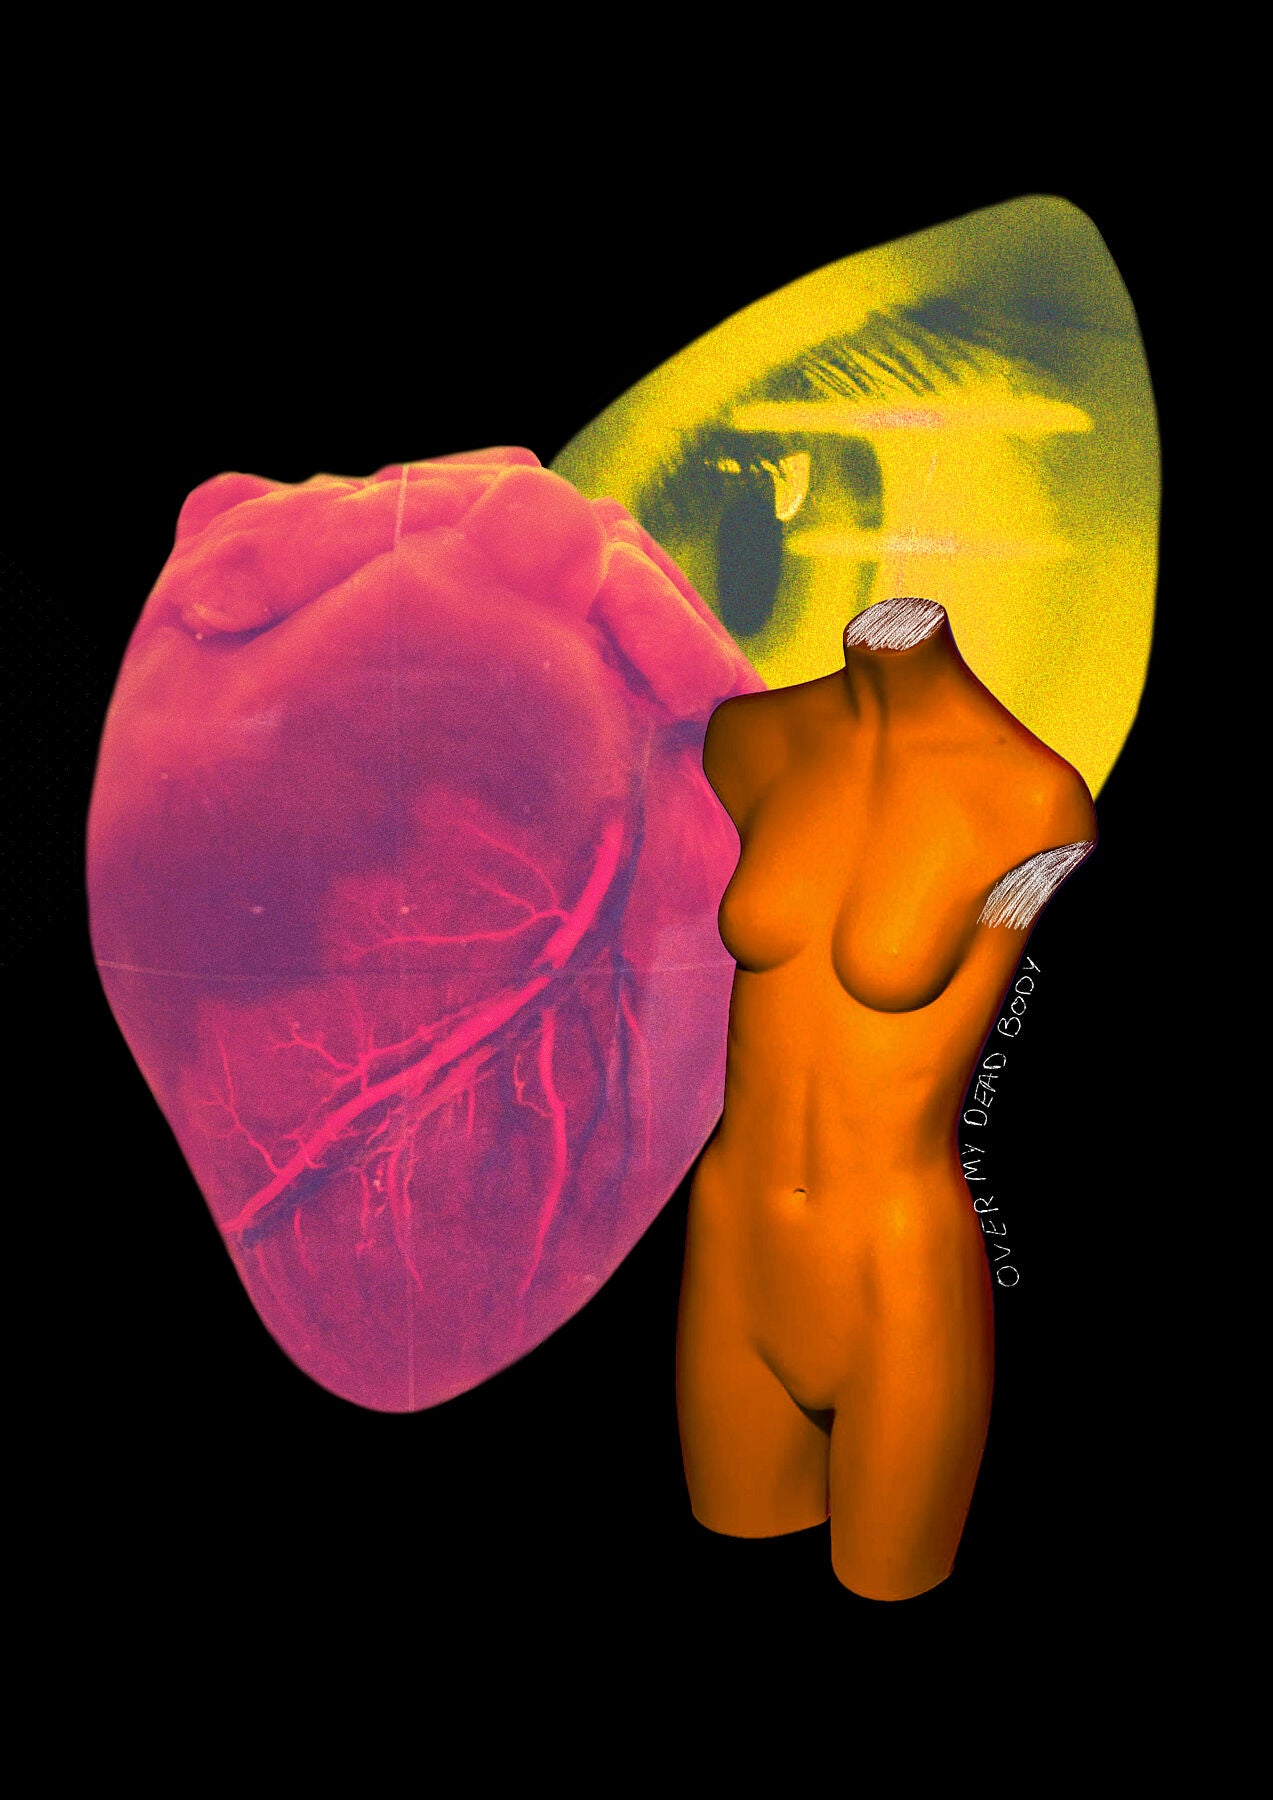 A surreal artwork titled 'Over My Dead Body!' by Elizabeth Corrall. It features a headless orange mannequin torso, a vibrant red anatomical heart, and a yellow eye against a black background. This A3-sized giclée print is part of a limited edition series of 50, printed on Ilford cotton textured paper.